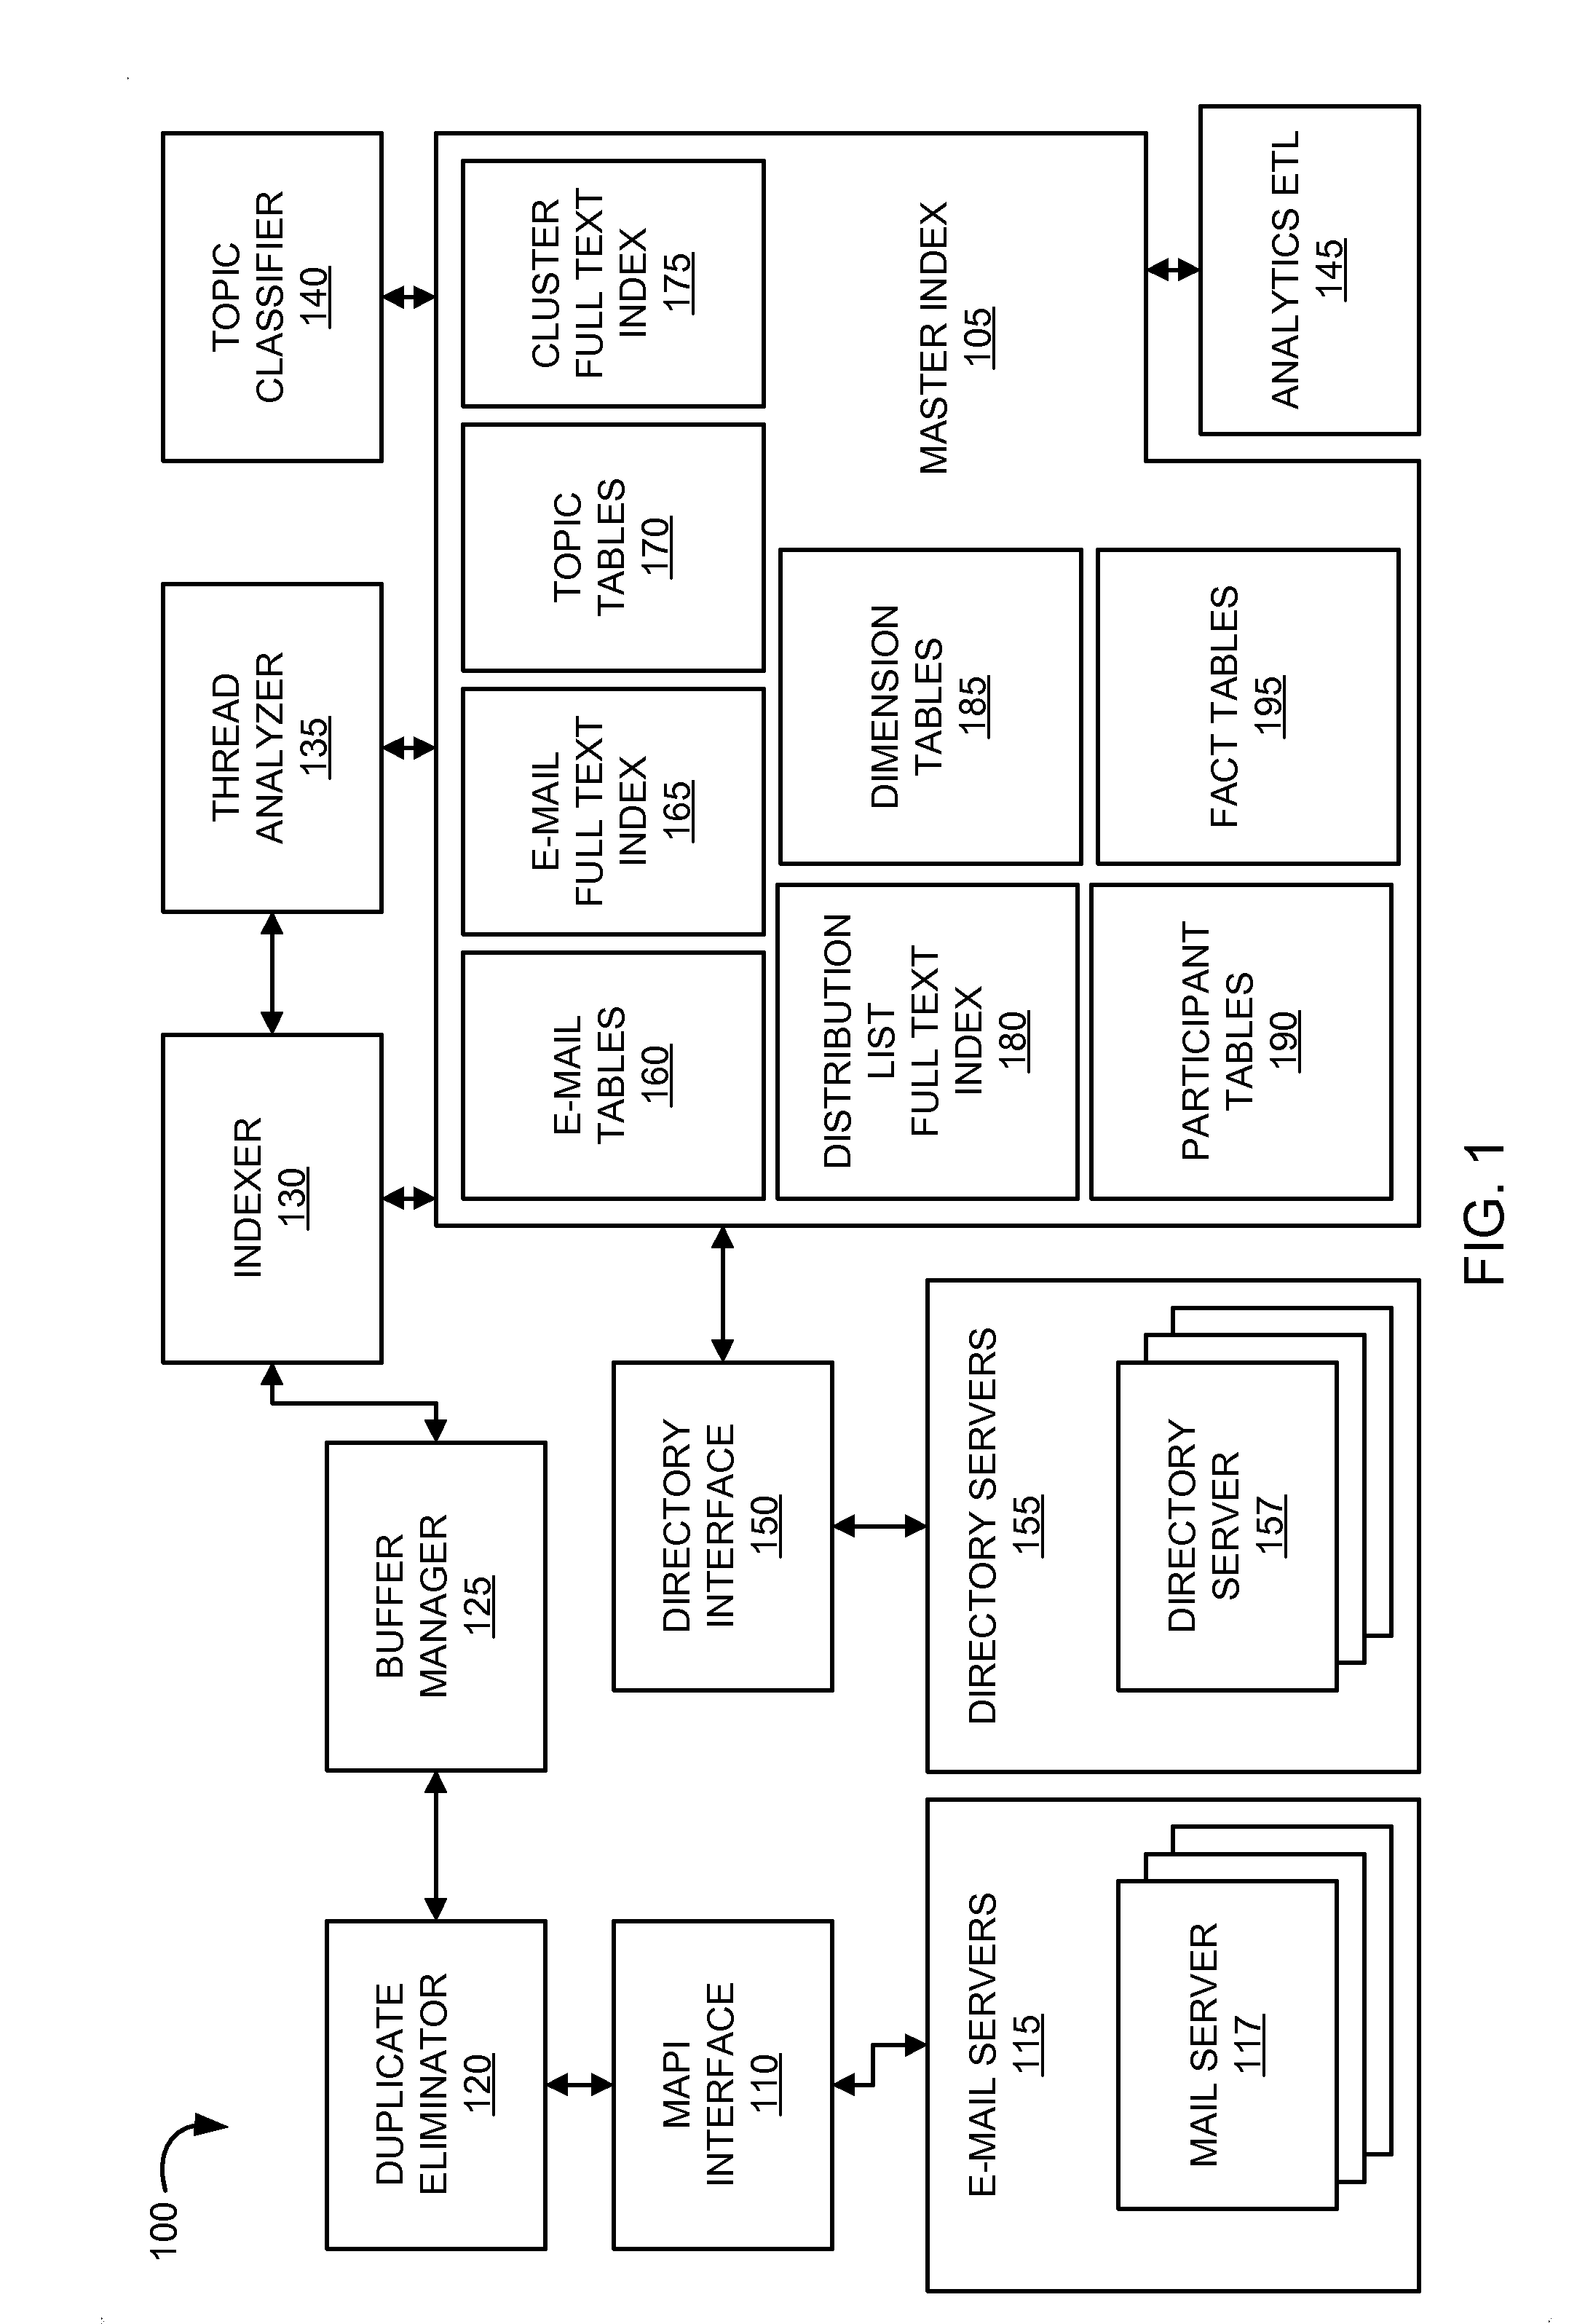 Methods and systems of electronic message threading and ranking